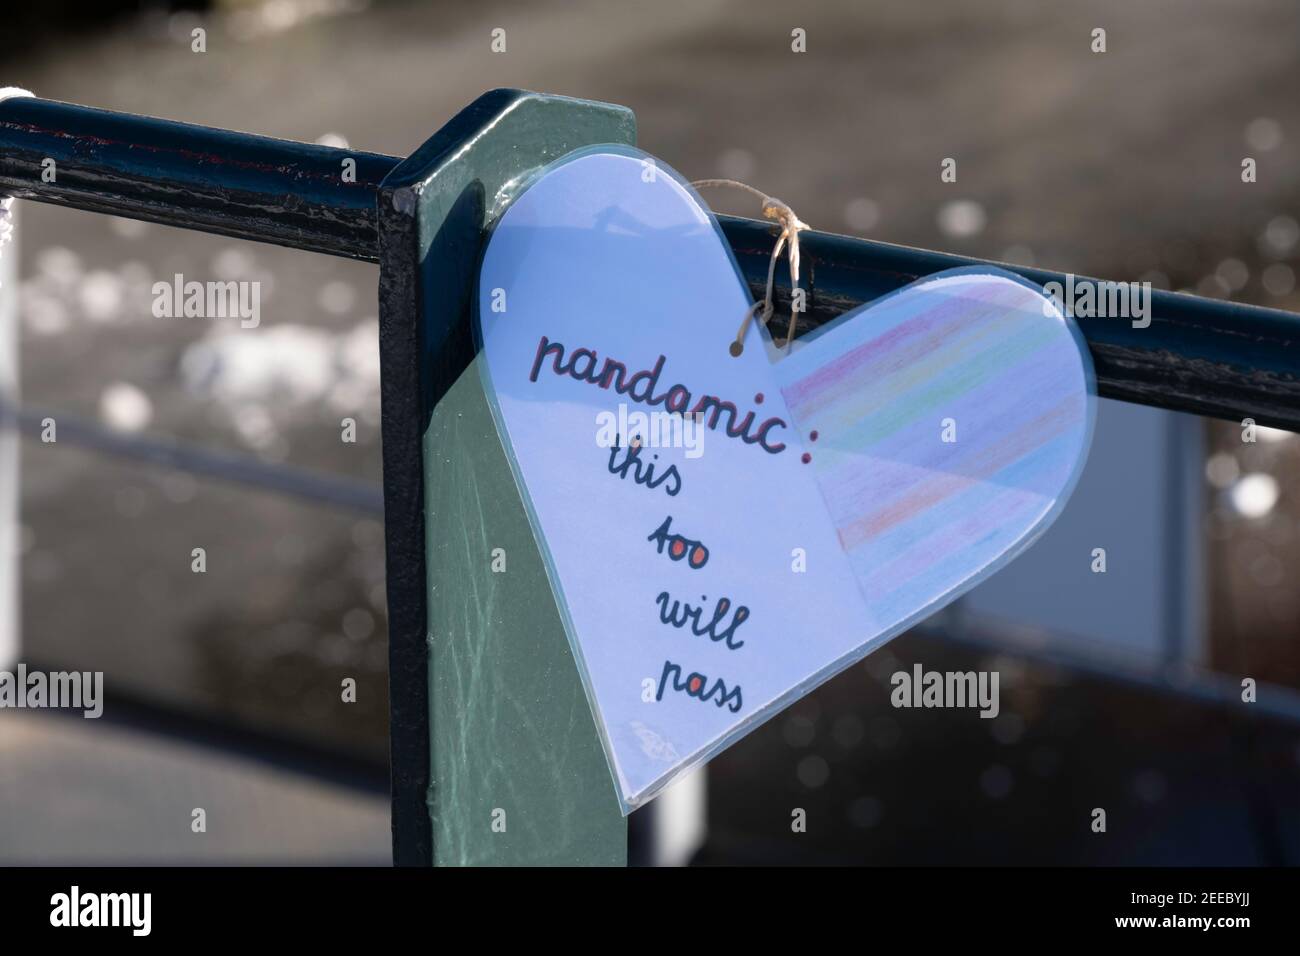 Plasticized paper heart with handwritten text 'Pandamic: this too will pass' hangs from the railing of a bridge in Lemmer, the Netherlands Stock Photo